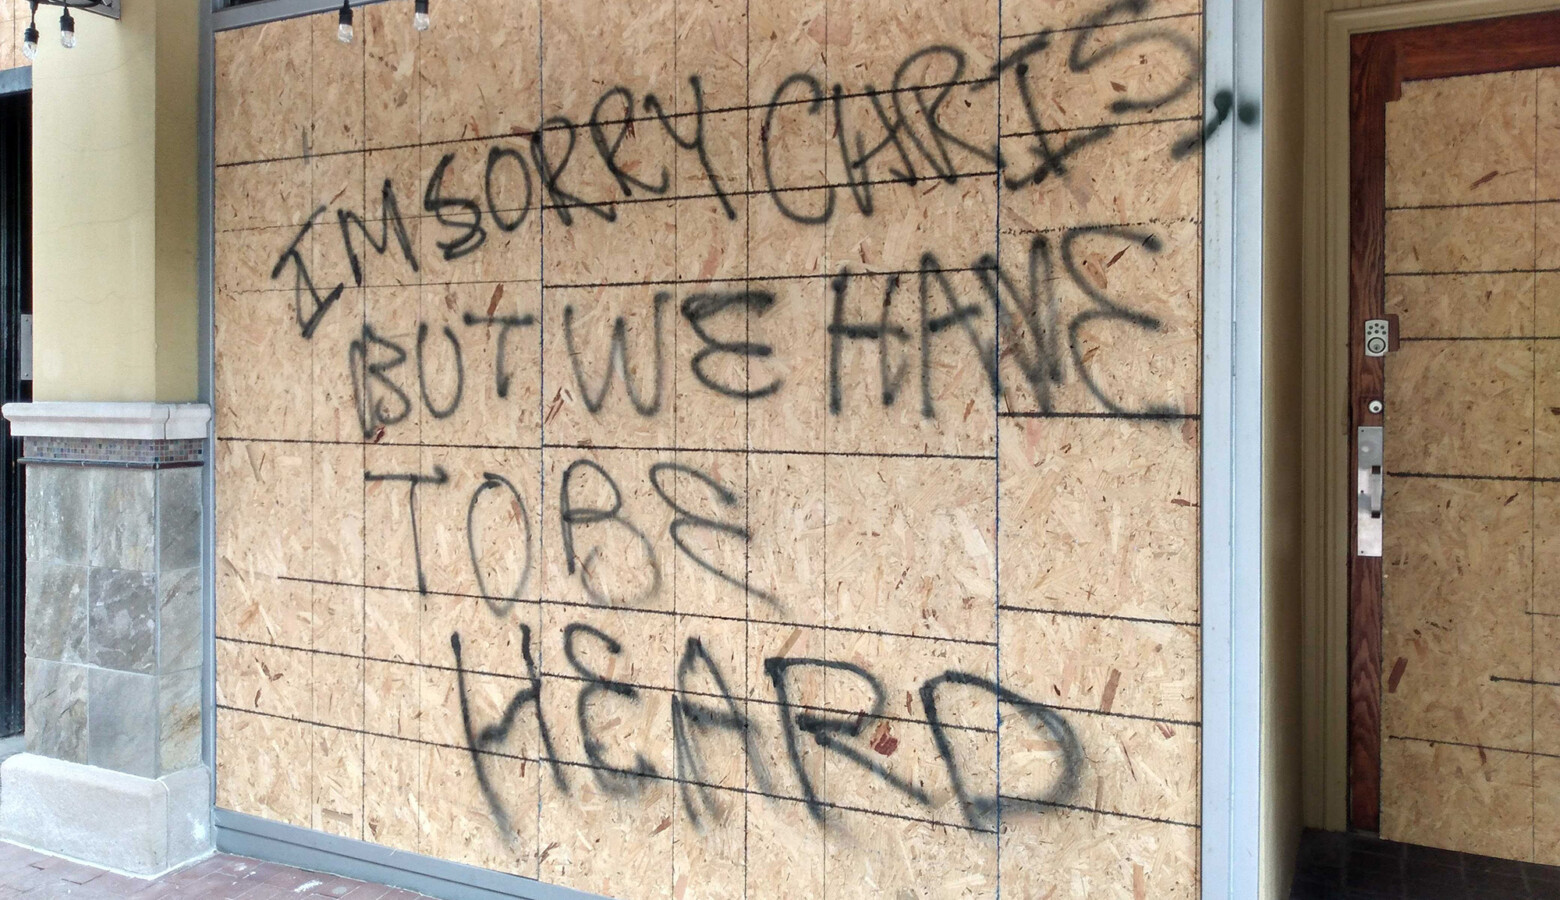 In Indianapolis, the first business with a broken window was Jack's Donuts, just east of the Statehouse. Protesters left a message for the owner after the clashes with police: "I'm sorry Chris, but we have to be heard." (Lauren Chapman/IPB News)